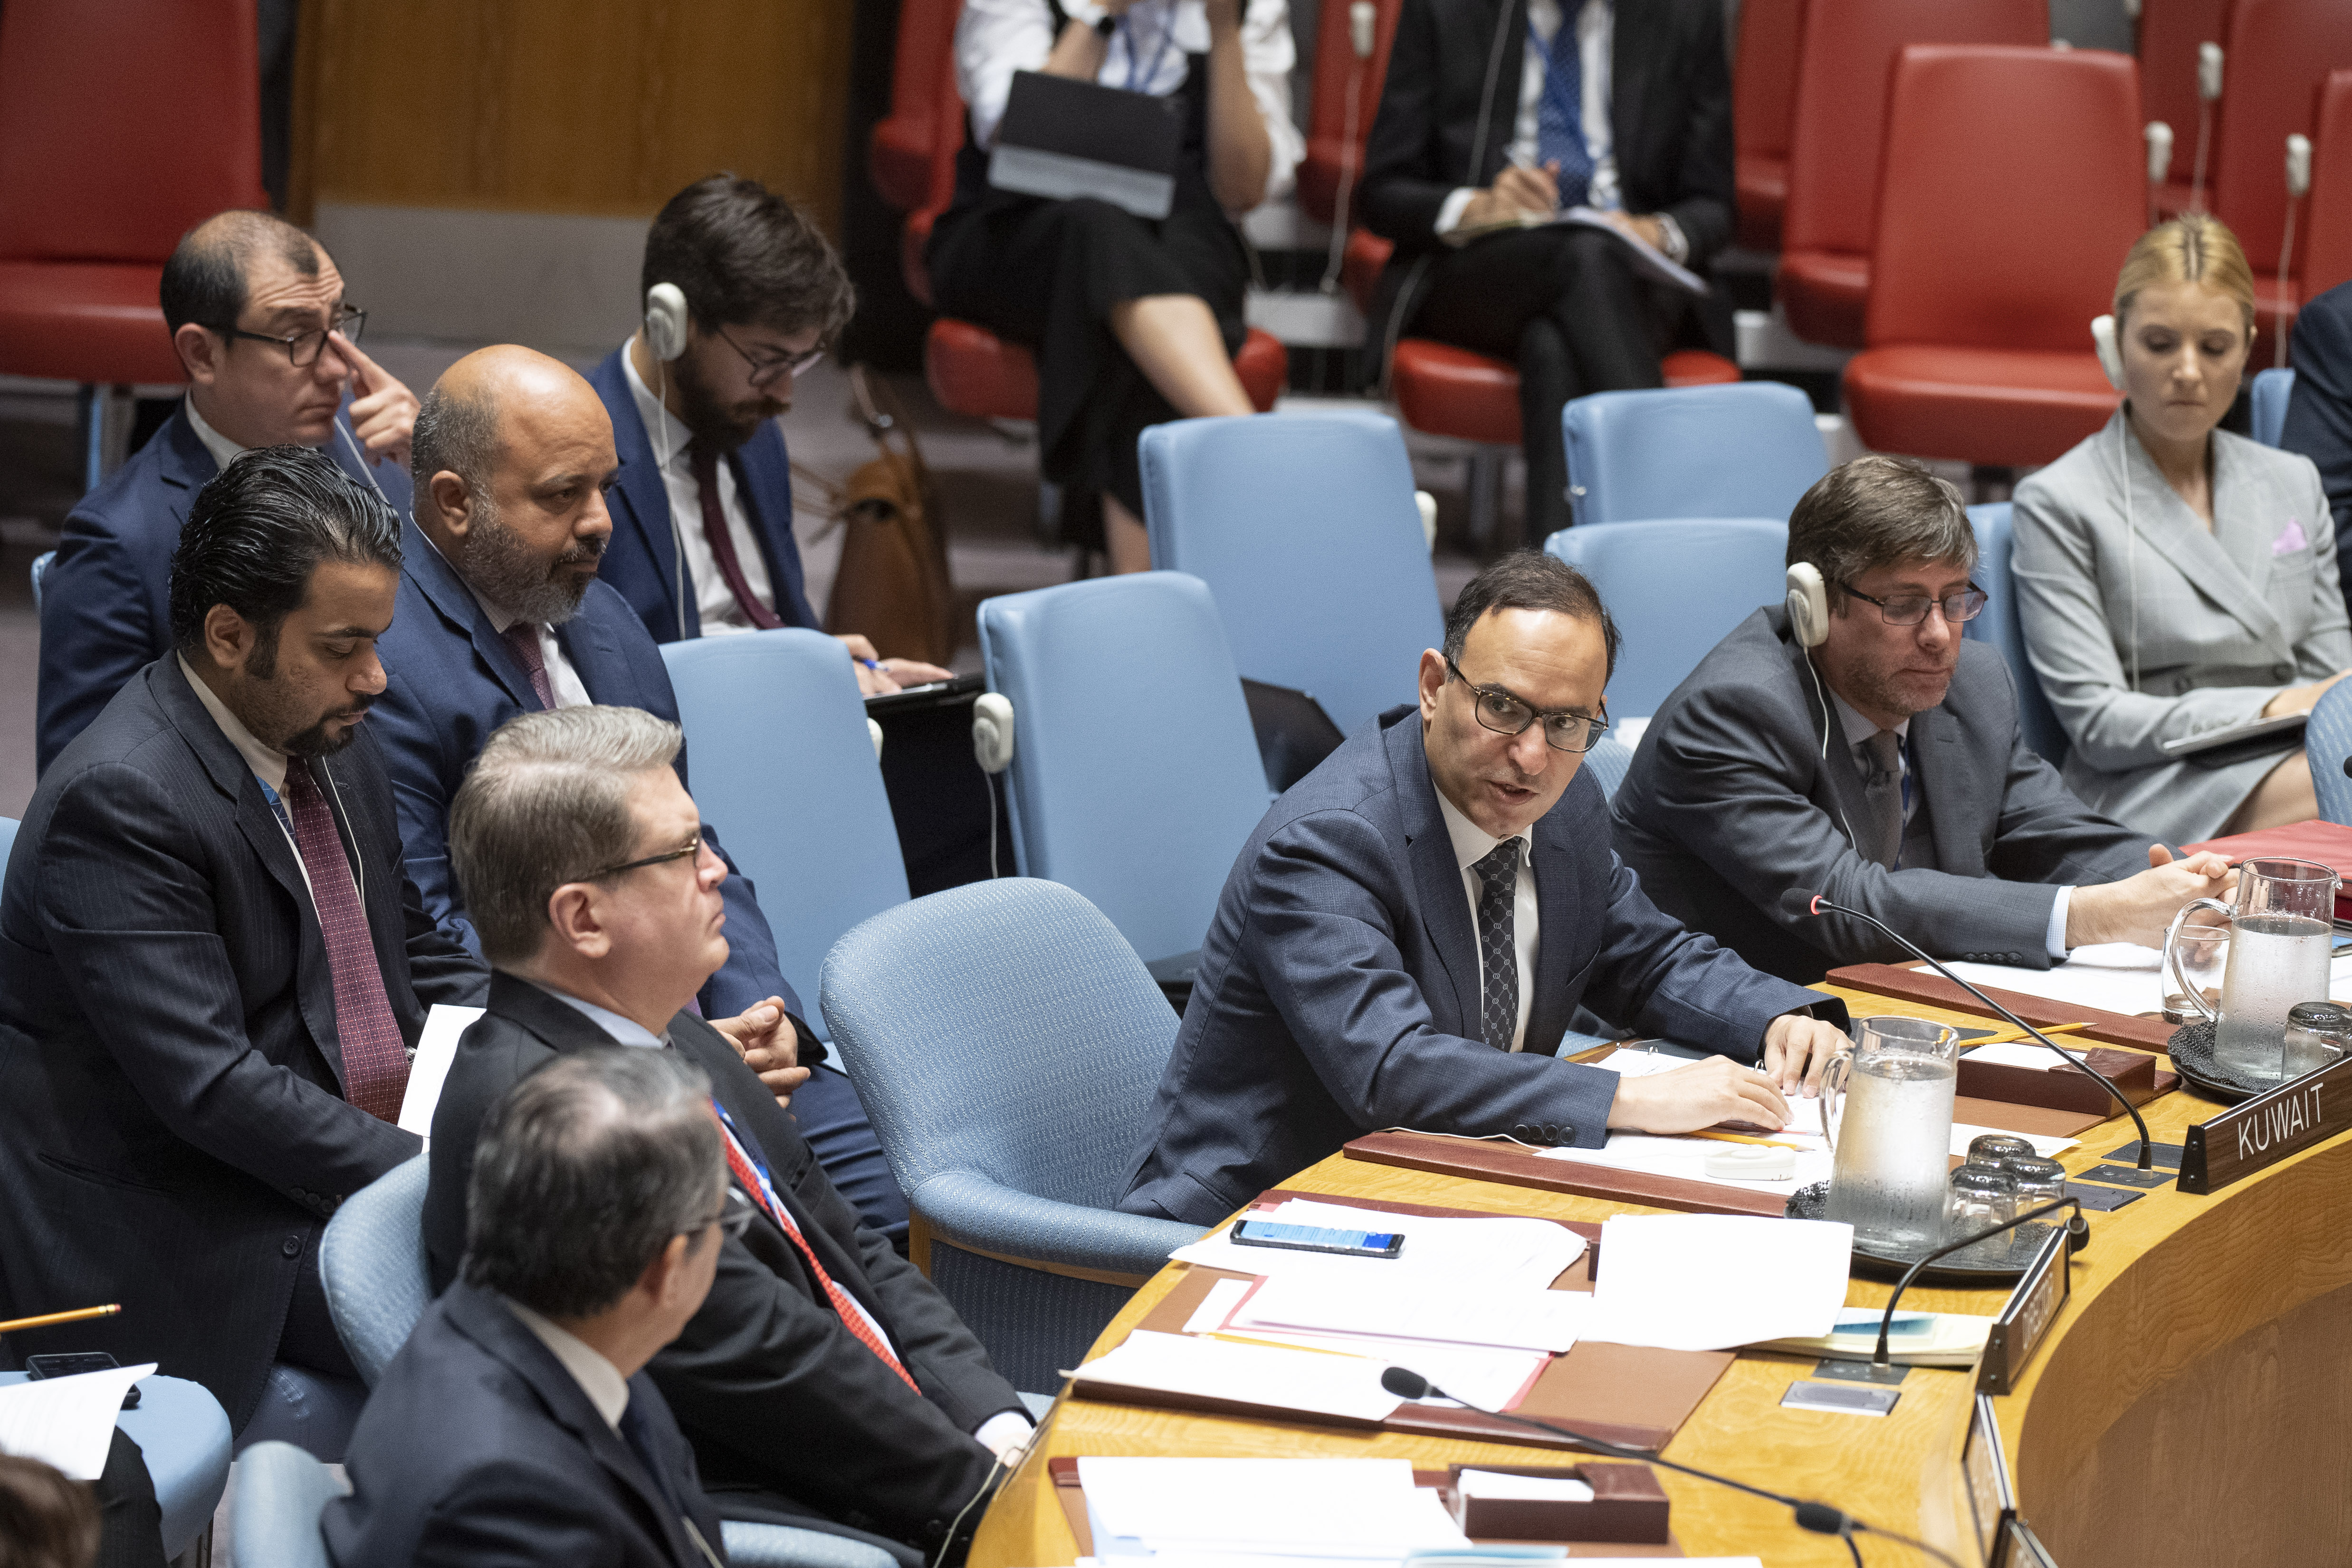 Kuwait Permanent Representative to UN addressing Security Council sessions